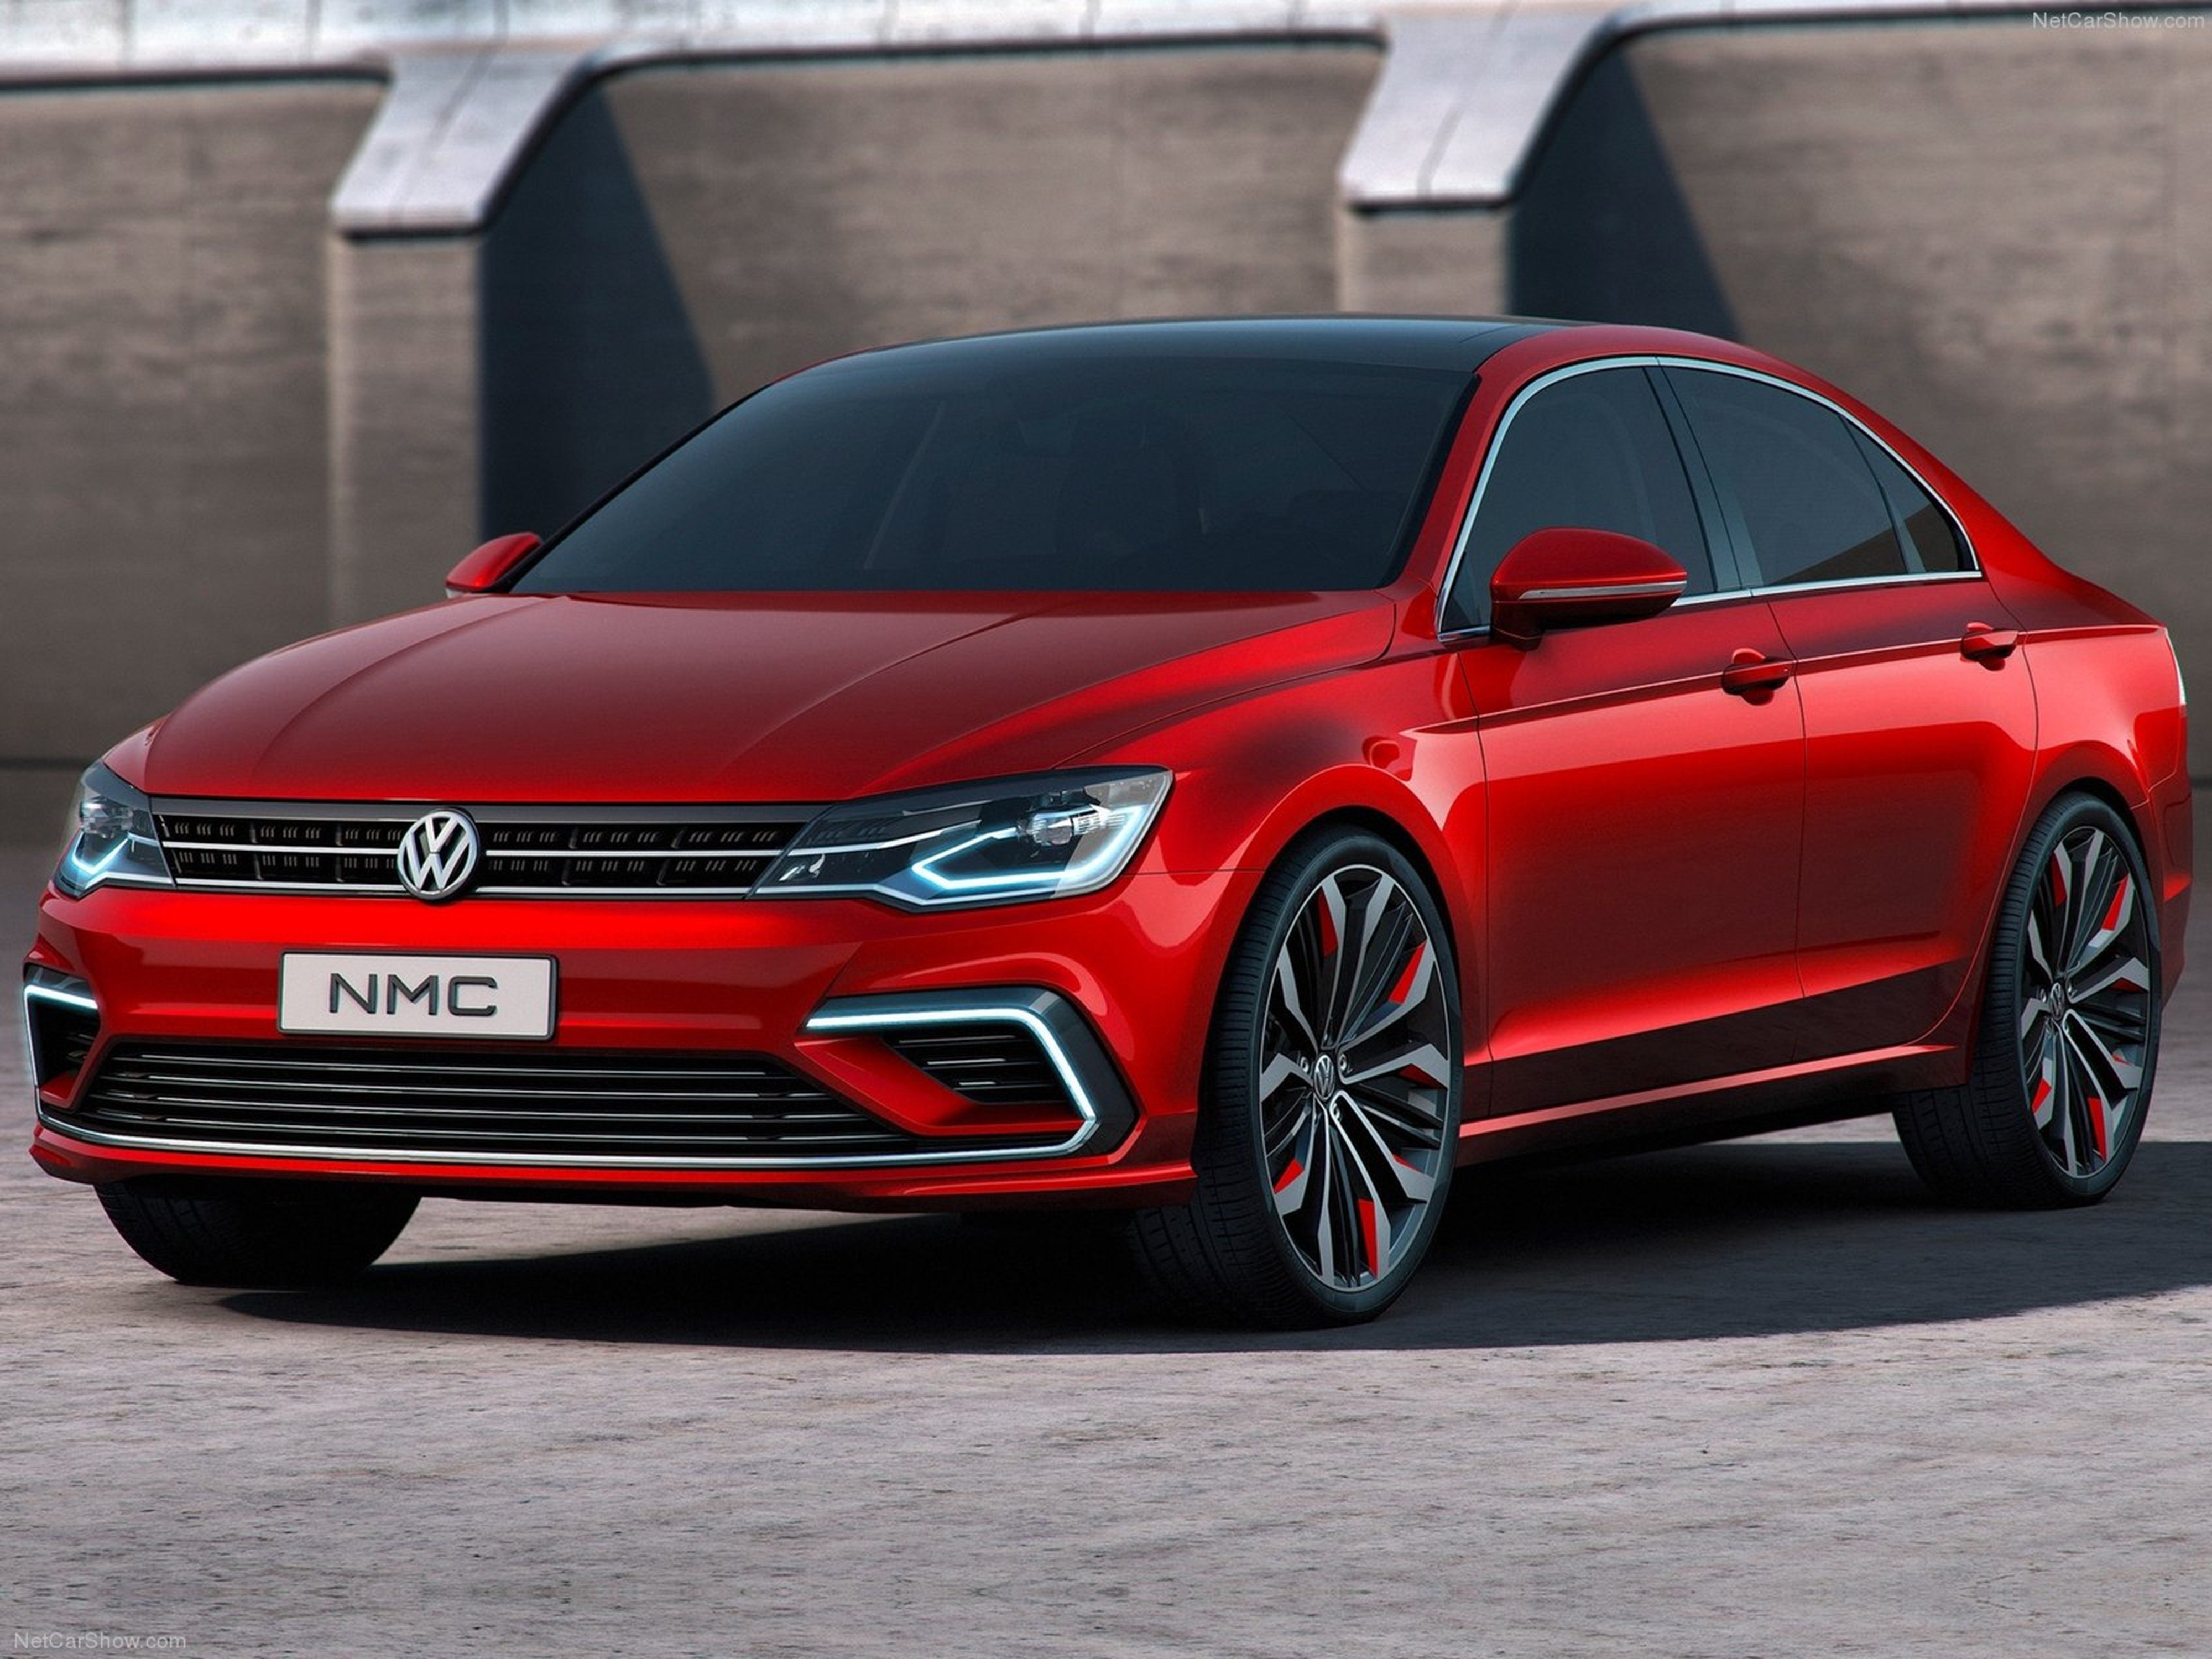 volkswagen , New, Midsize, Coupe, Concept, 2014, Tuture, Red, Wallpaper, , 024000x3000 Wallpaper